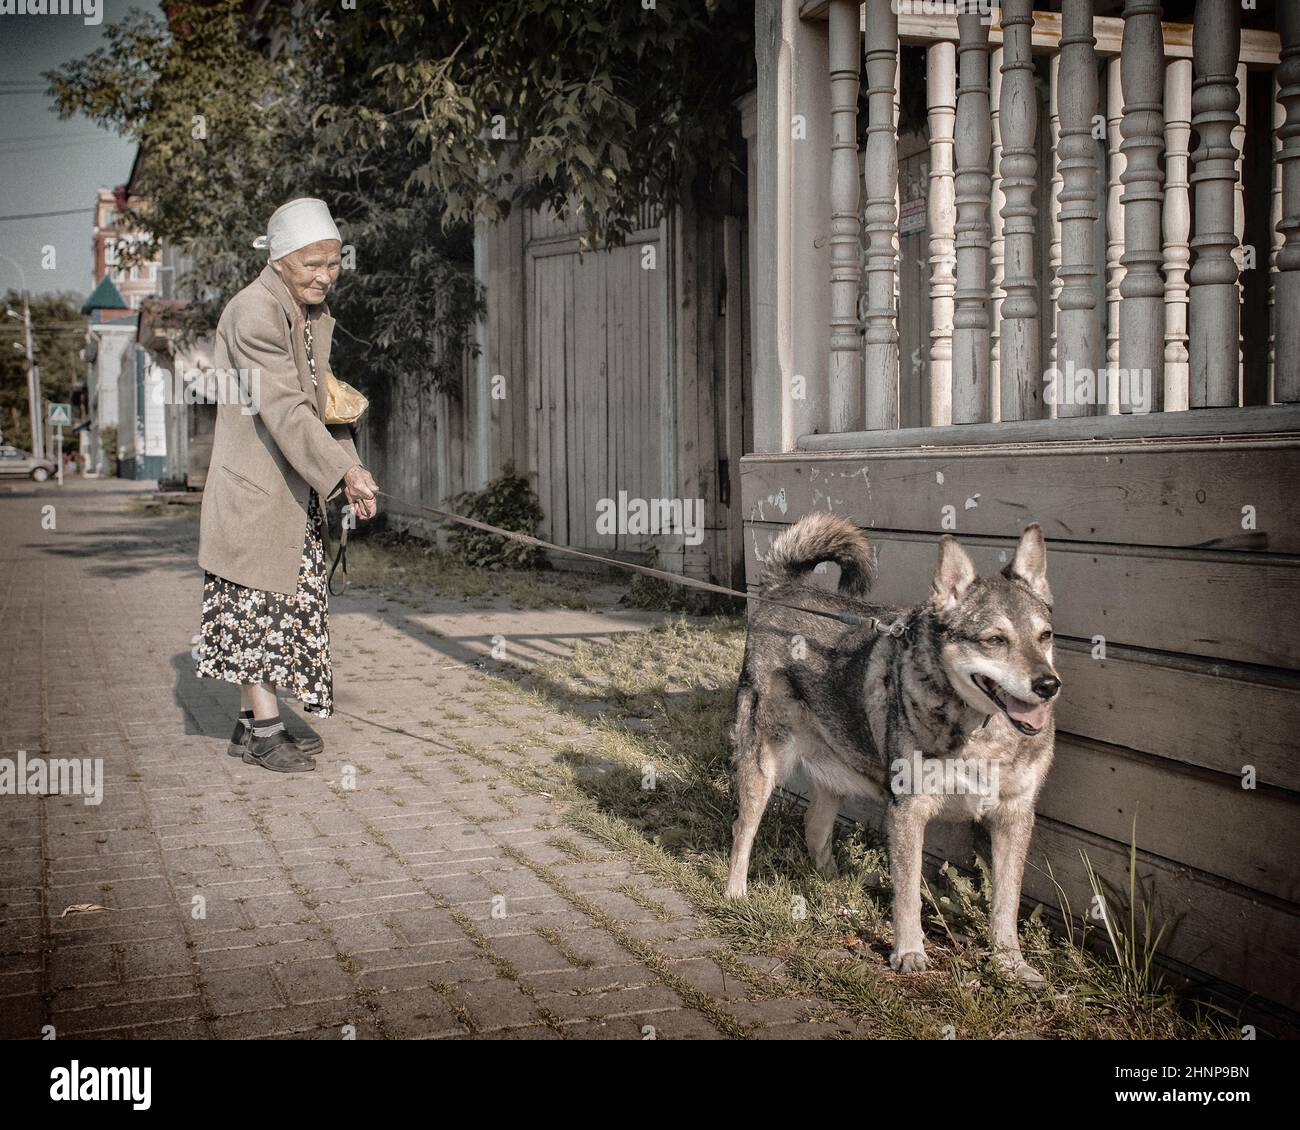 19th of July 2018, Russia, Tomsk, older woman with dog on the street Stock Photo